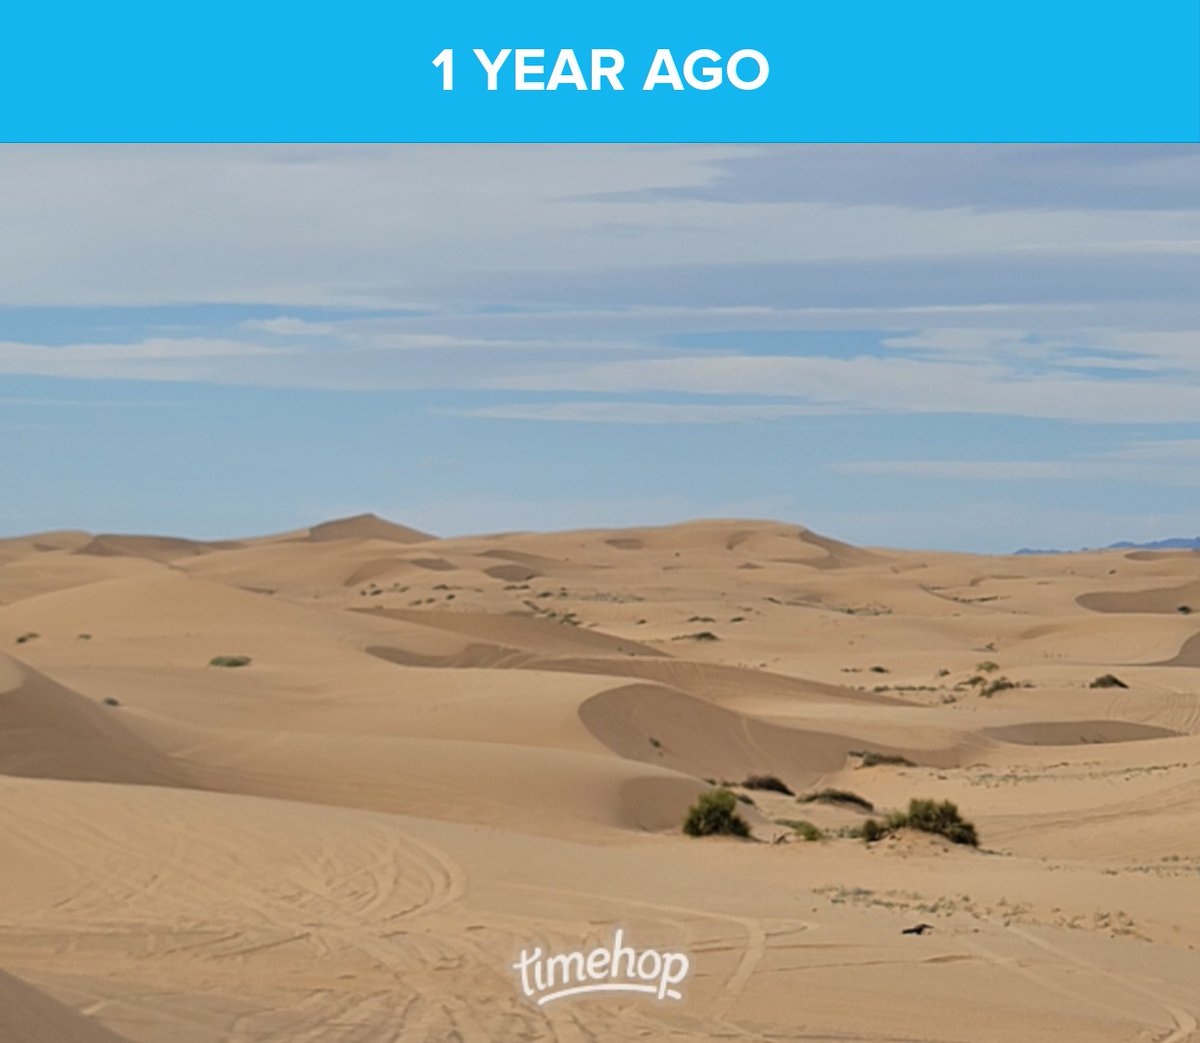 #WideOpenSpaces
#Glamis